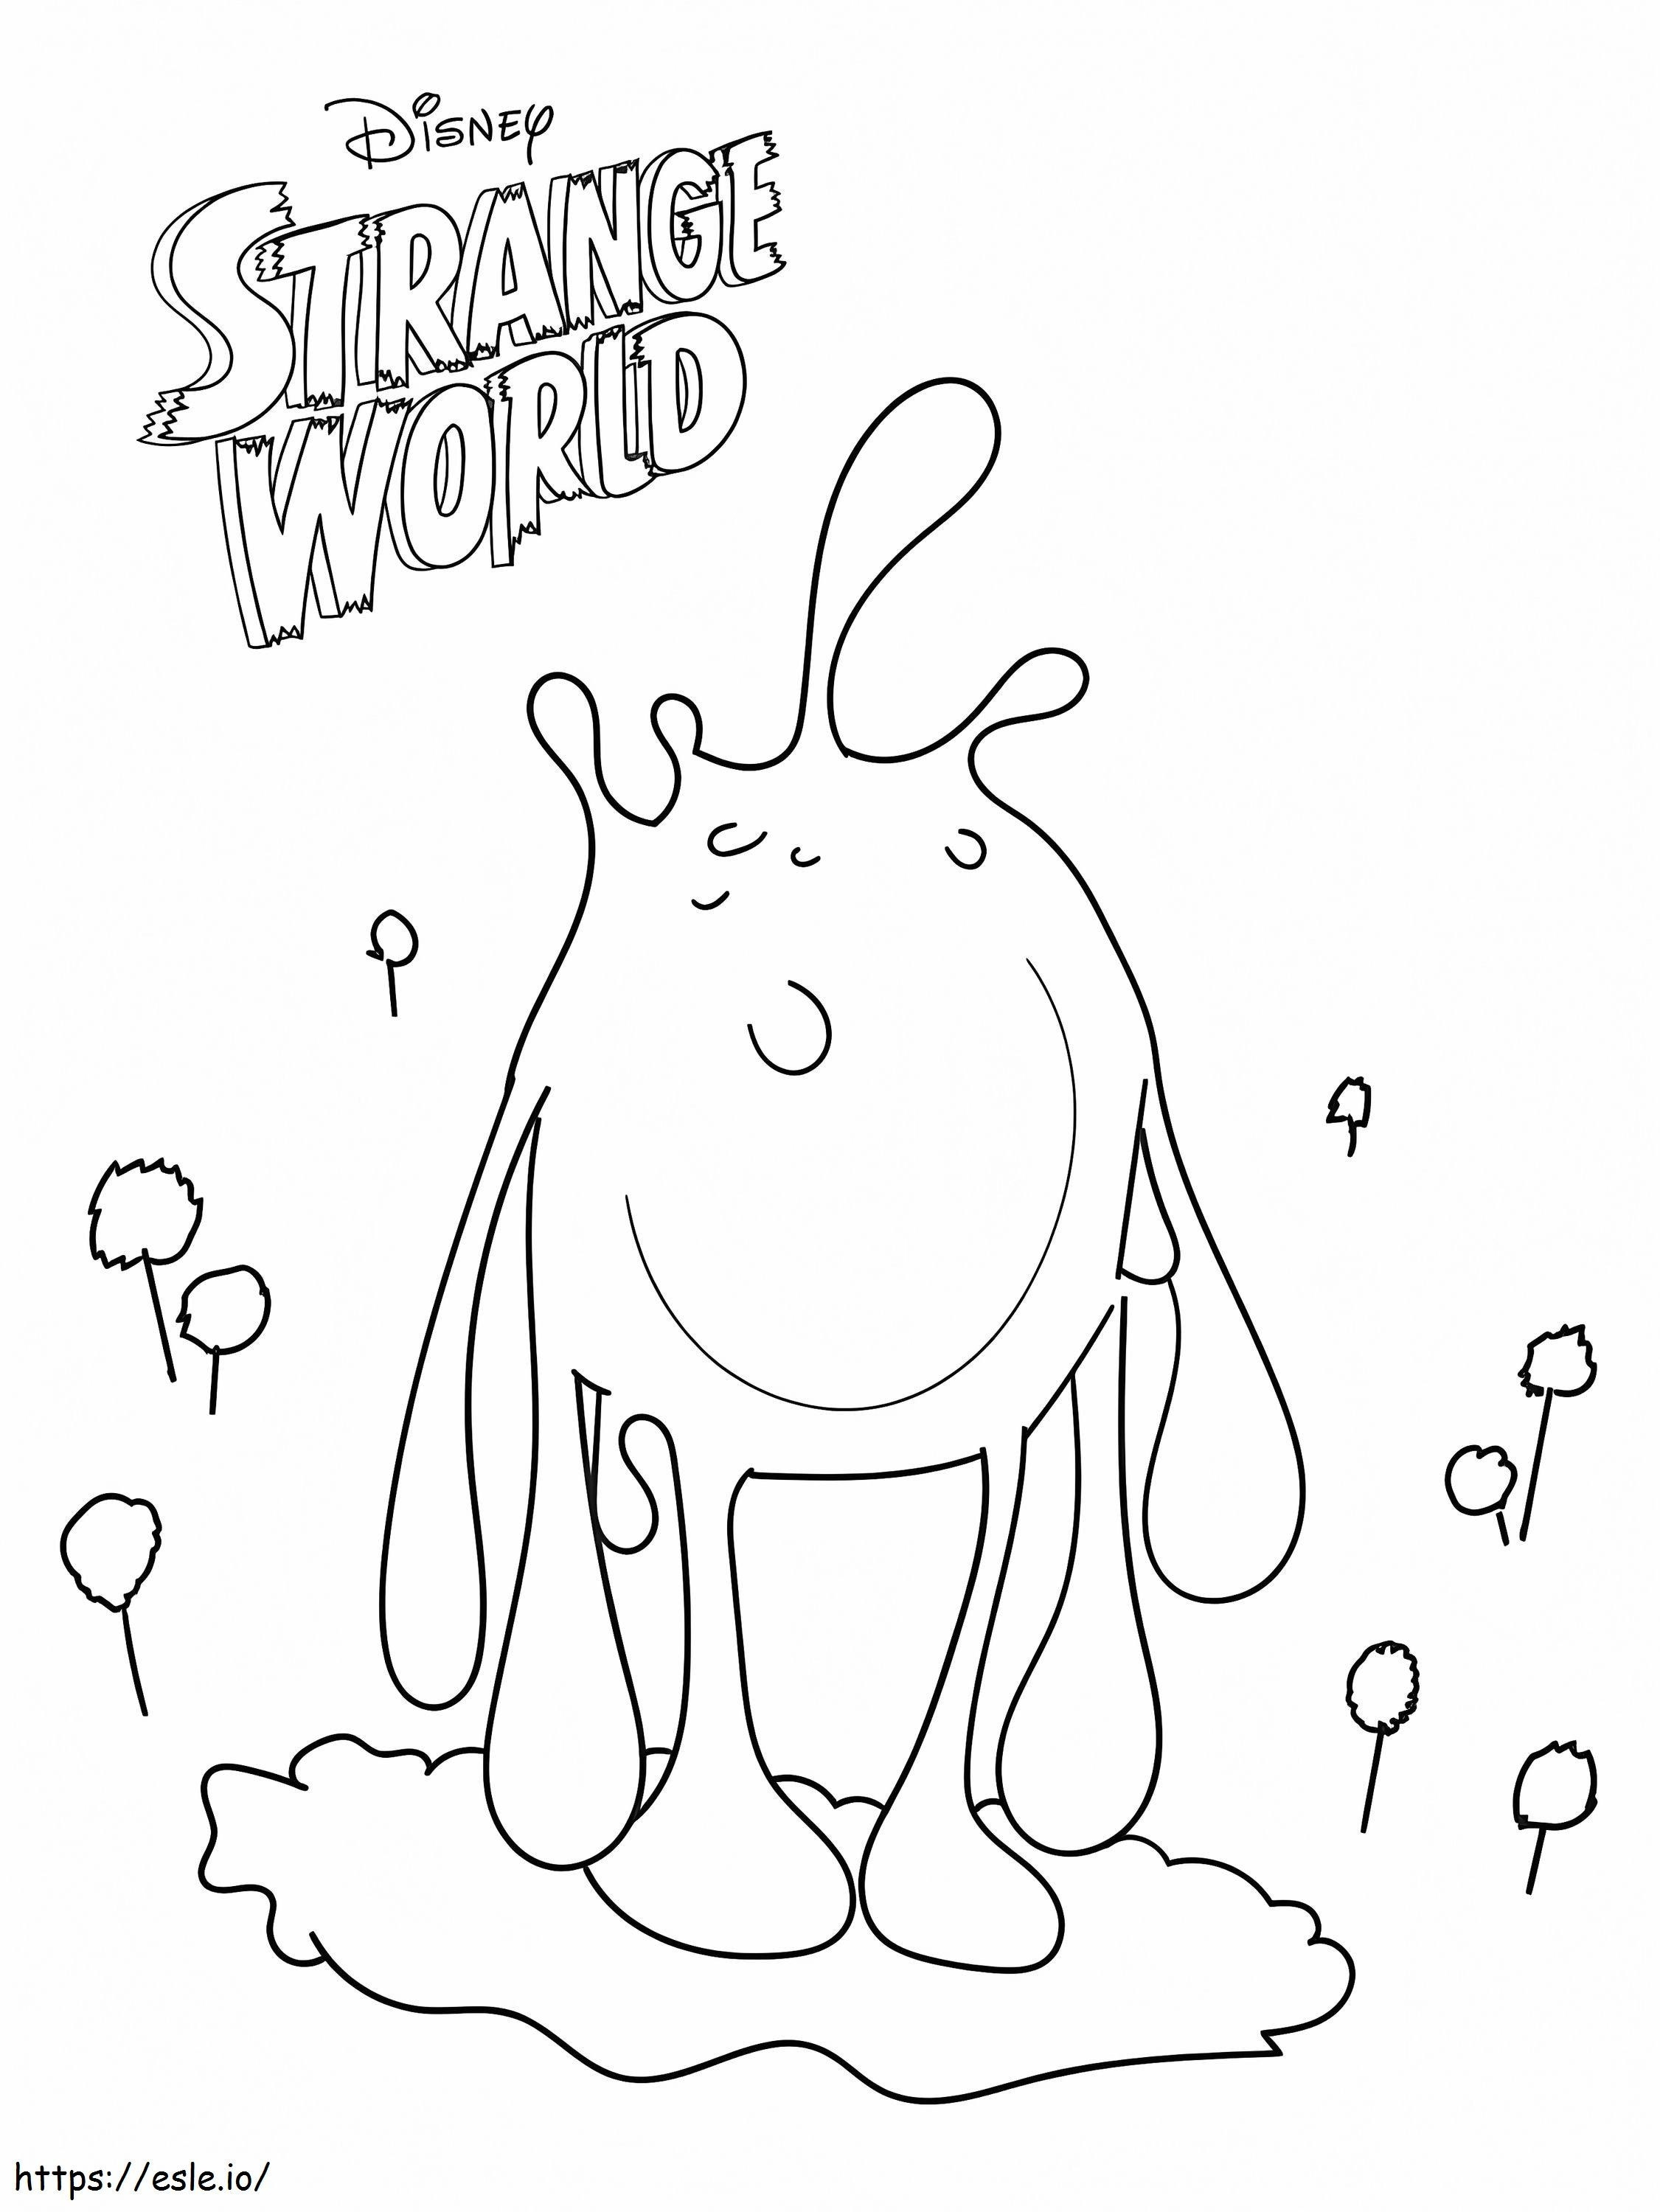 Blob From Strange World coloring page